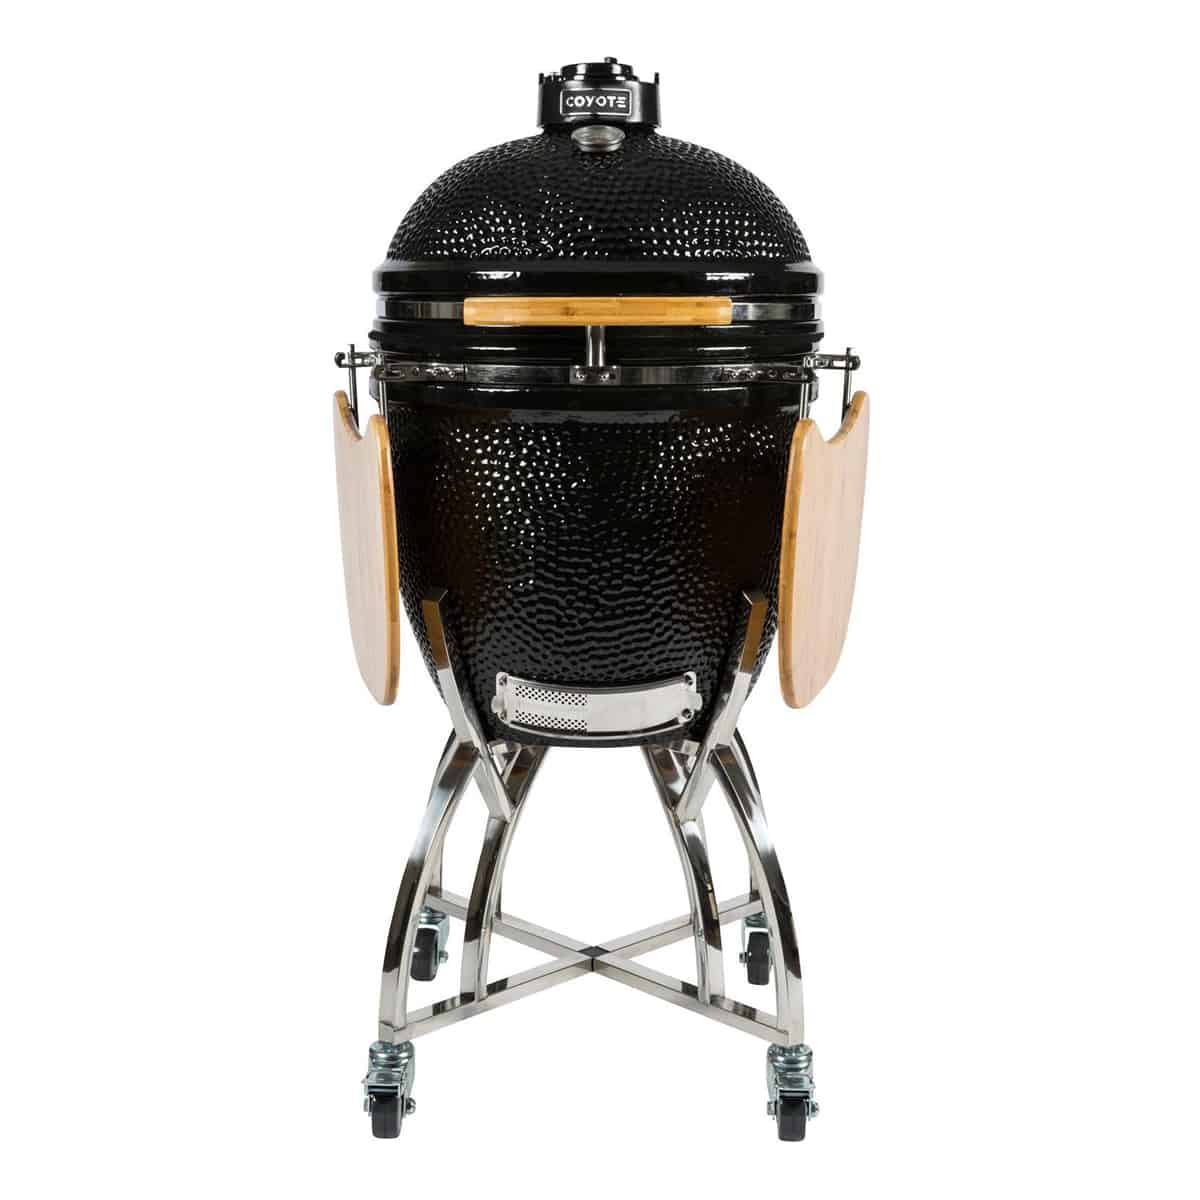 Coyote Asado Smoker with Stand and Side Shelves Ceramic Grill Shelves Down